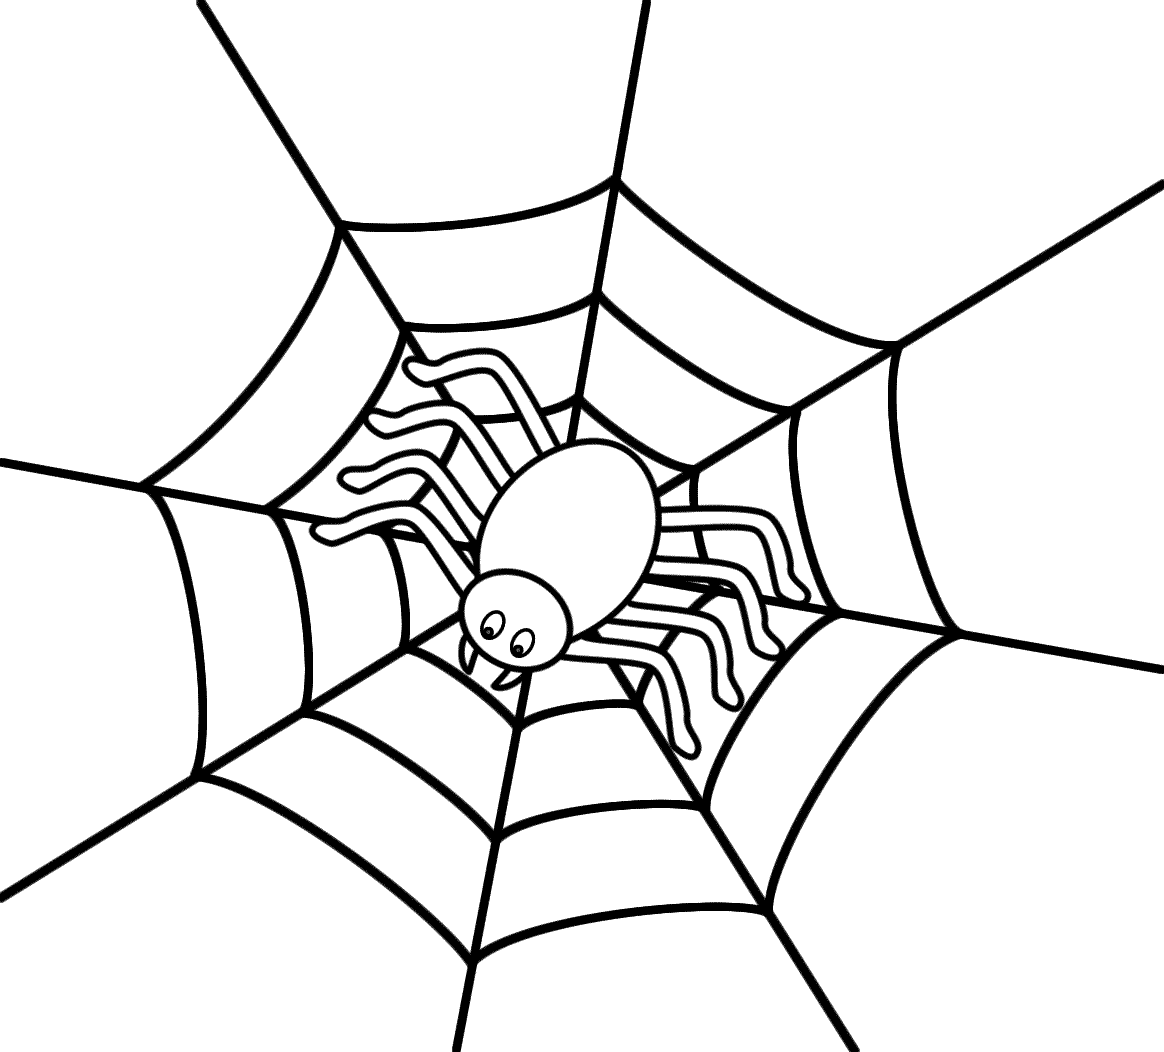 Spider in the center of a web - Coloring Page (Halloween)